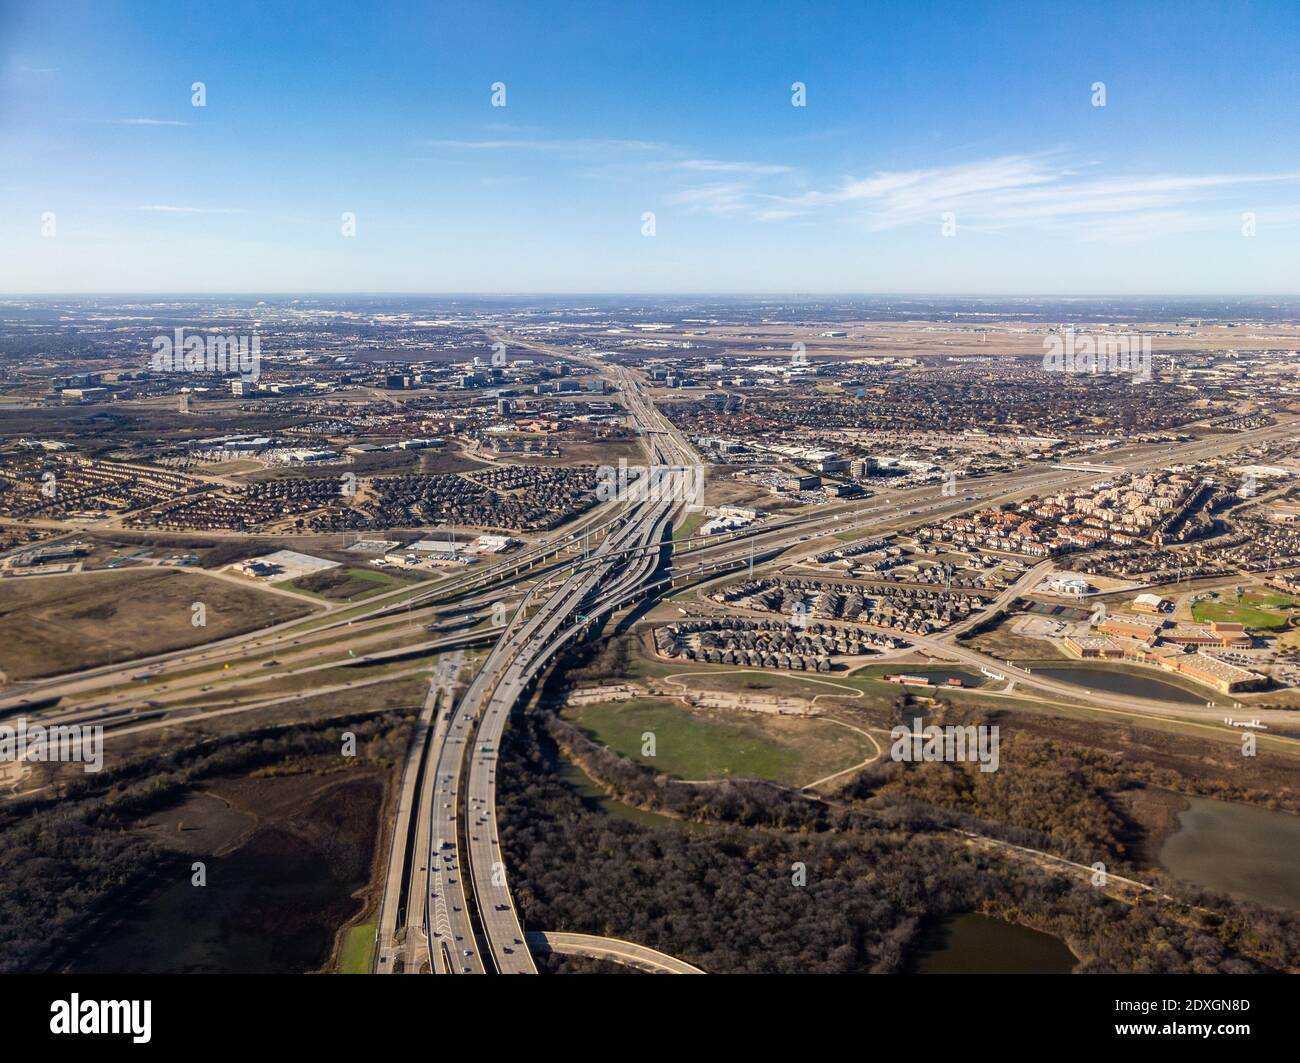 Aerial view of busy overlapping highways in Dallas, Texas Stock Photo